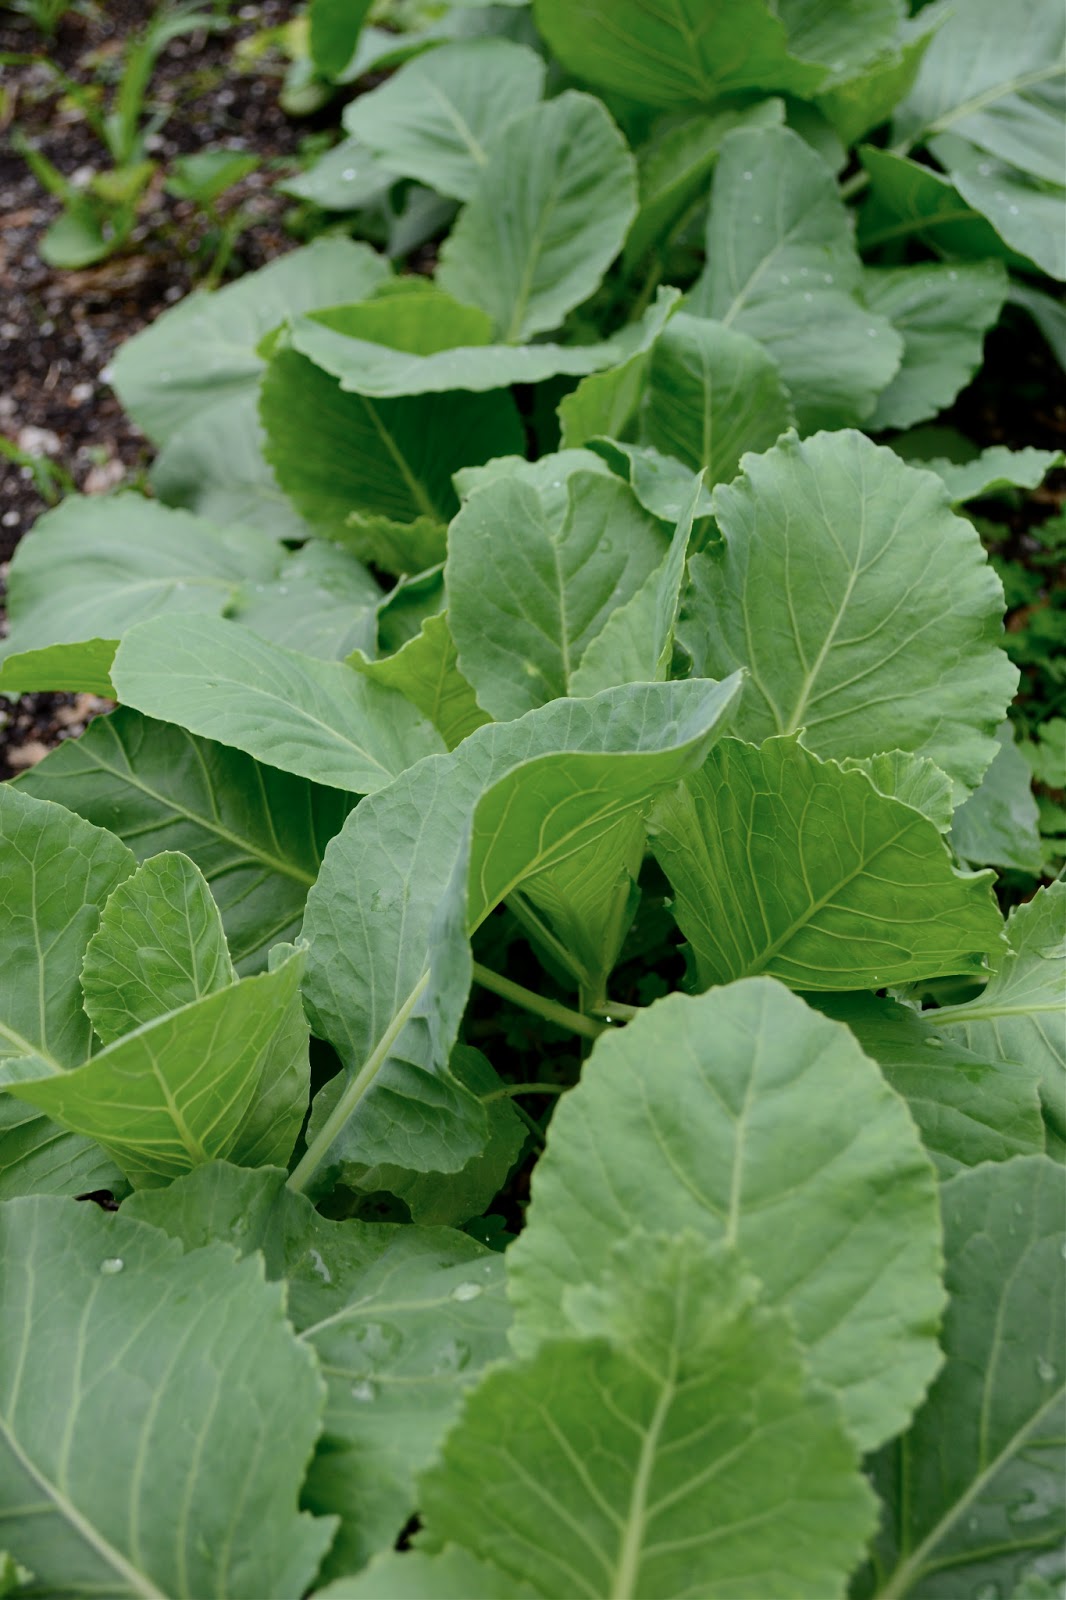 Early Jersey green cabbage growing